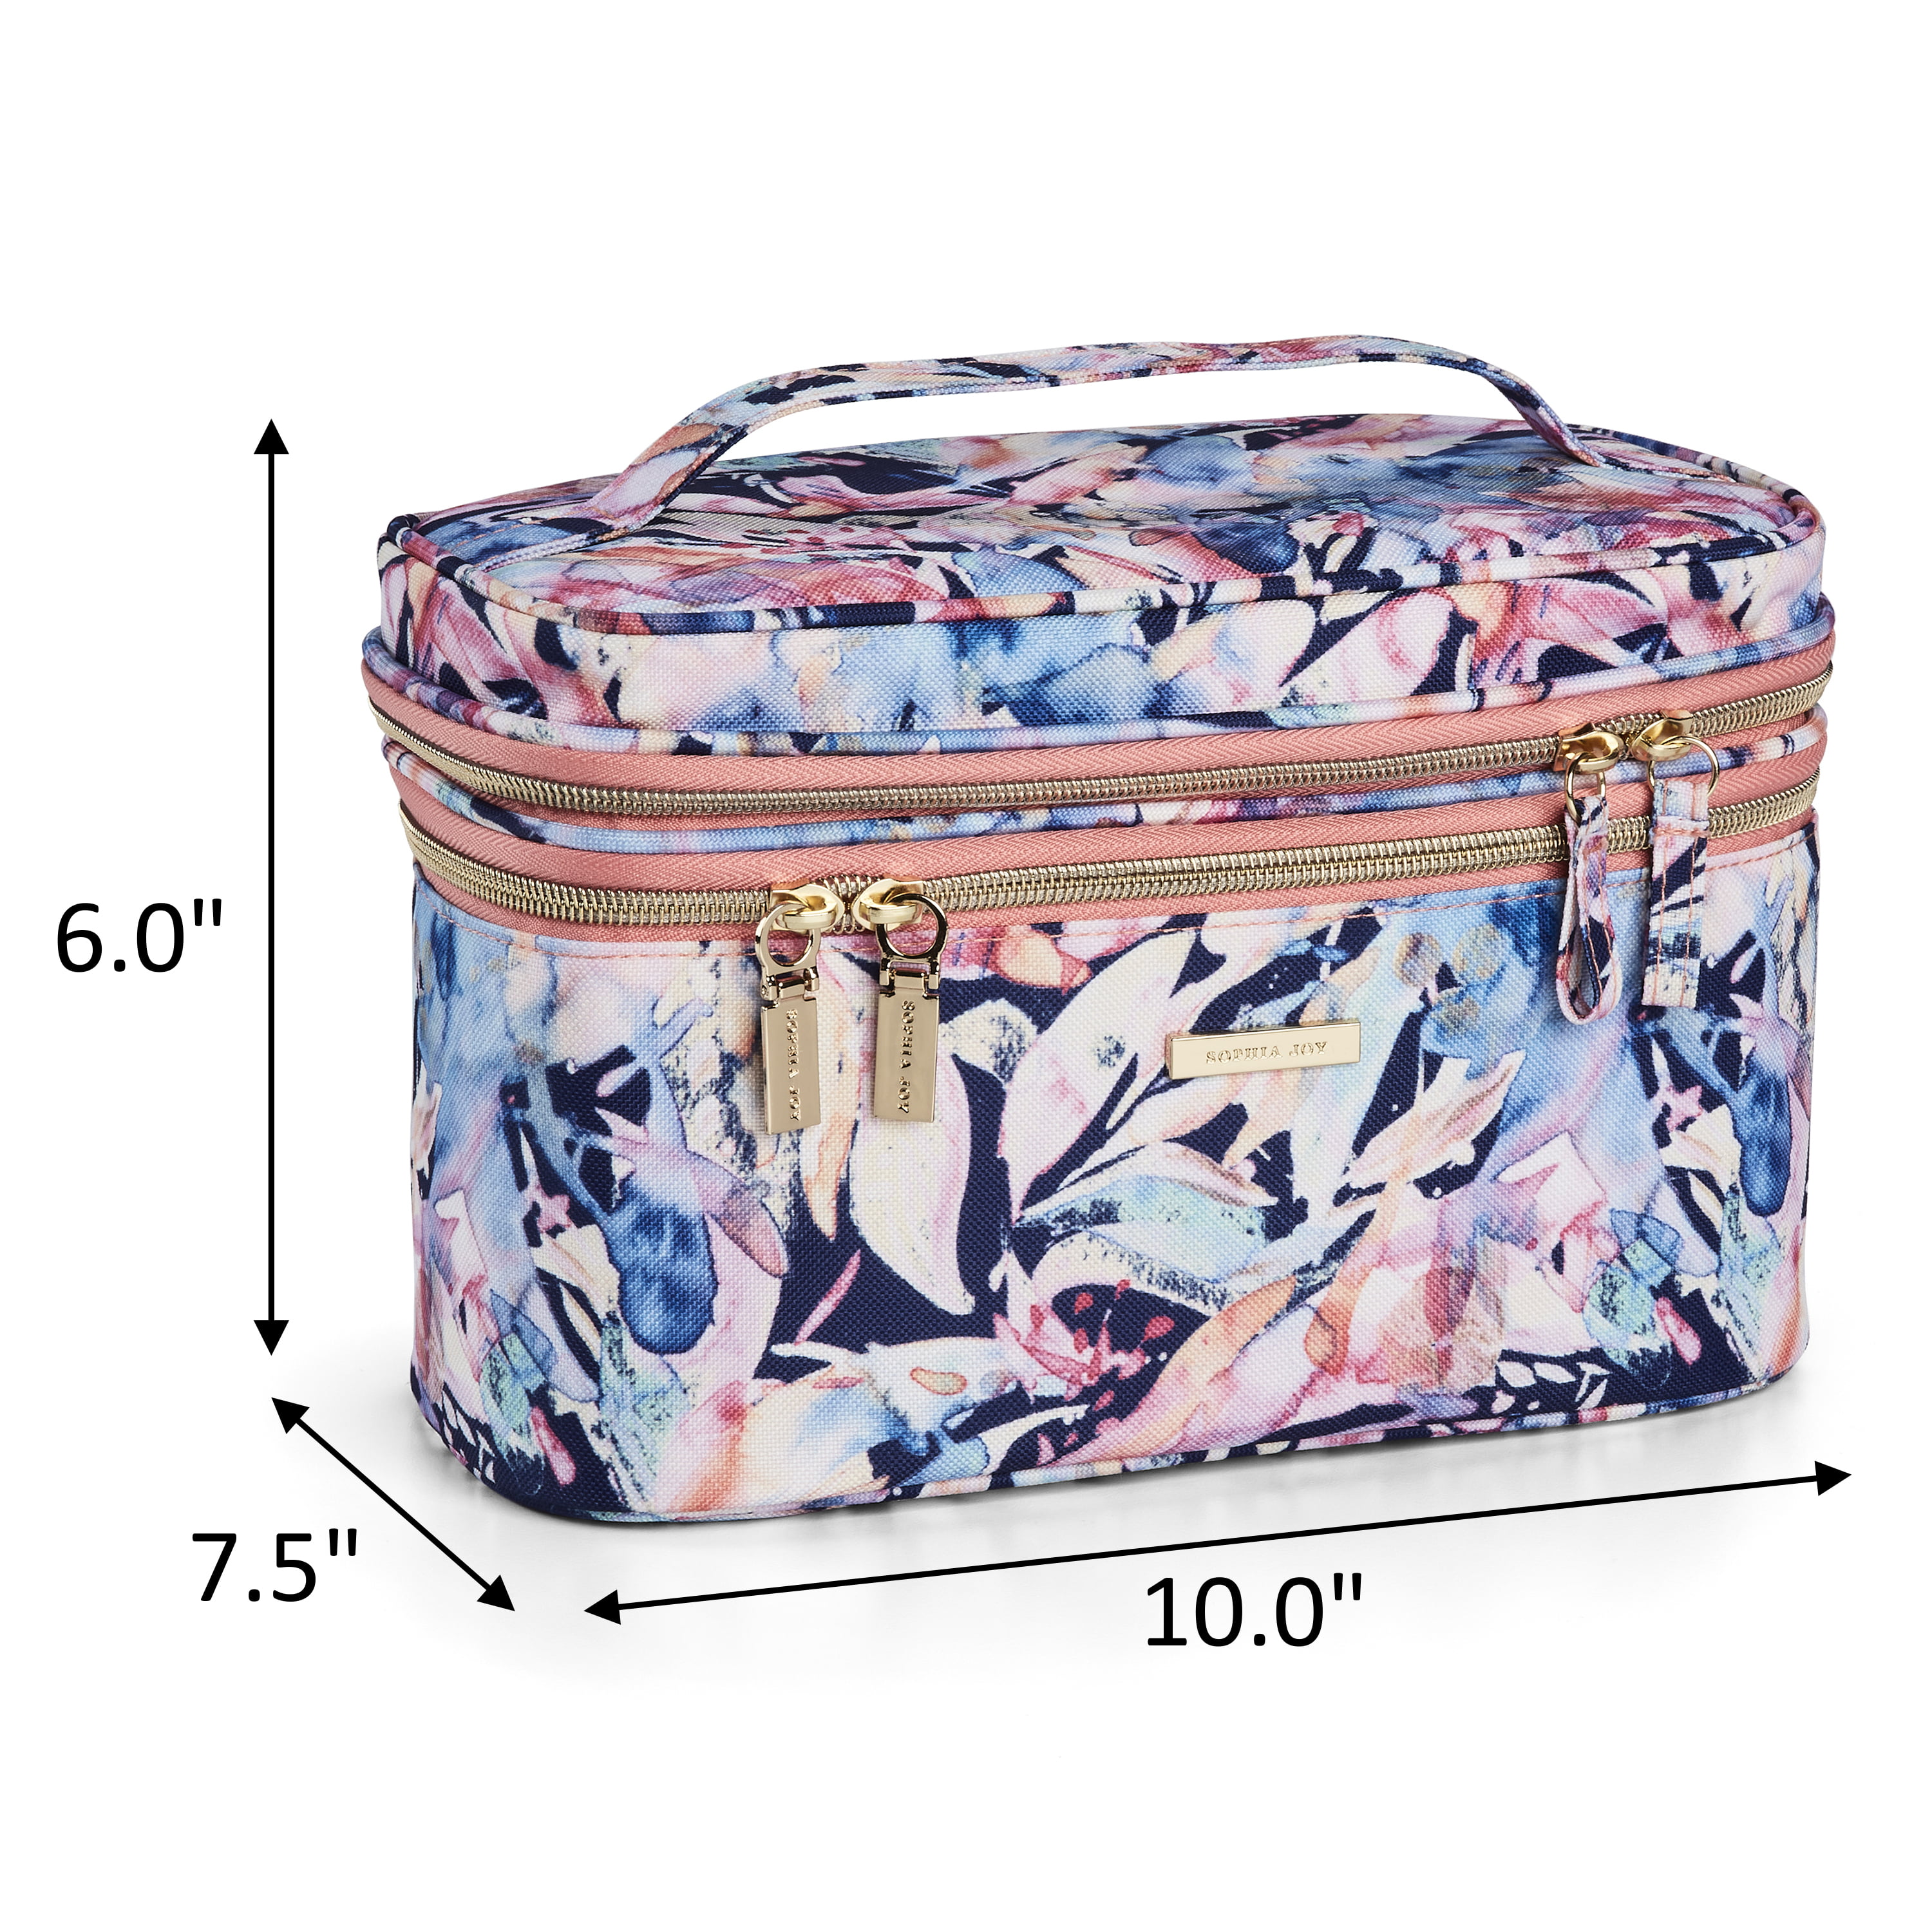 Sophia Joy Double Zip Cosmetic Accessory Train Case in Blue & Pink Breezy  Fashion Pattern with Separate Brush Compartment - Walmart.com